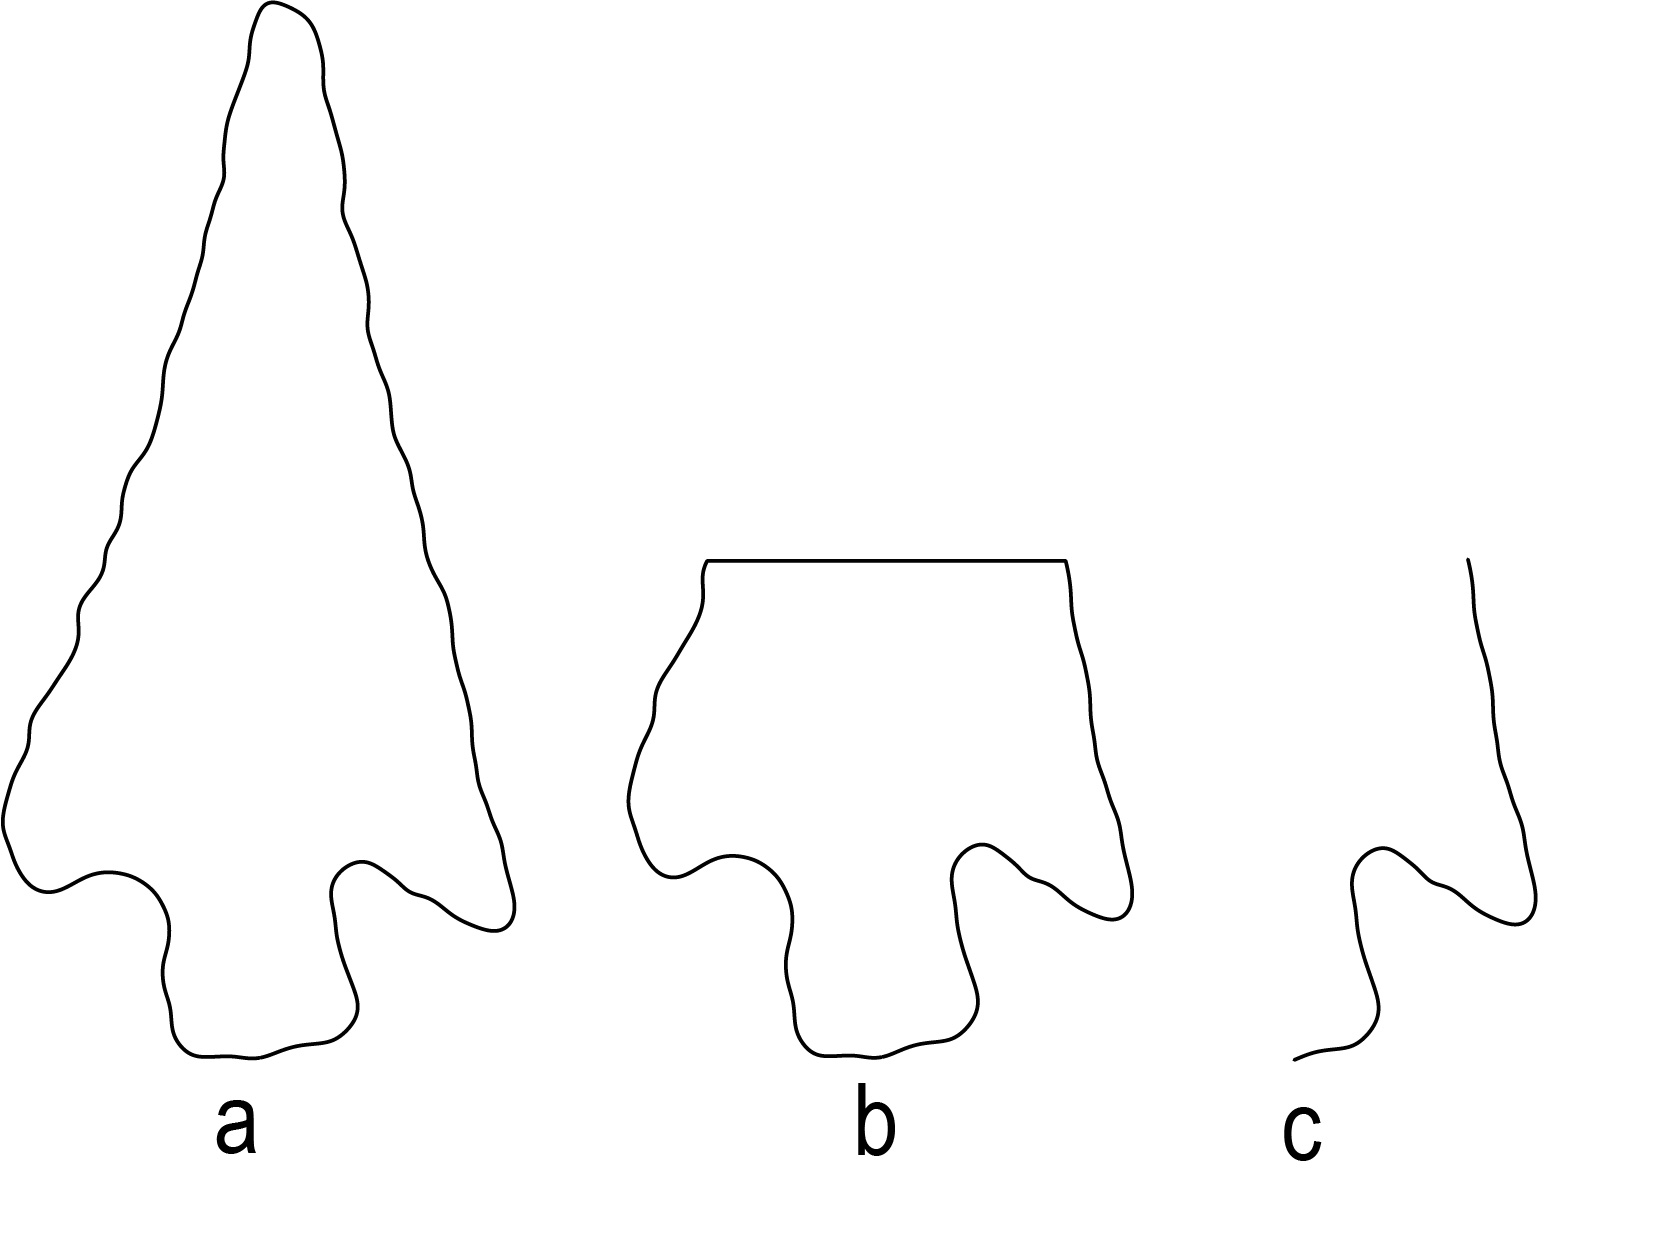 Demonstration of how a projectile point outline is reduced to one corner for geometric morphometric analysis.